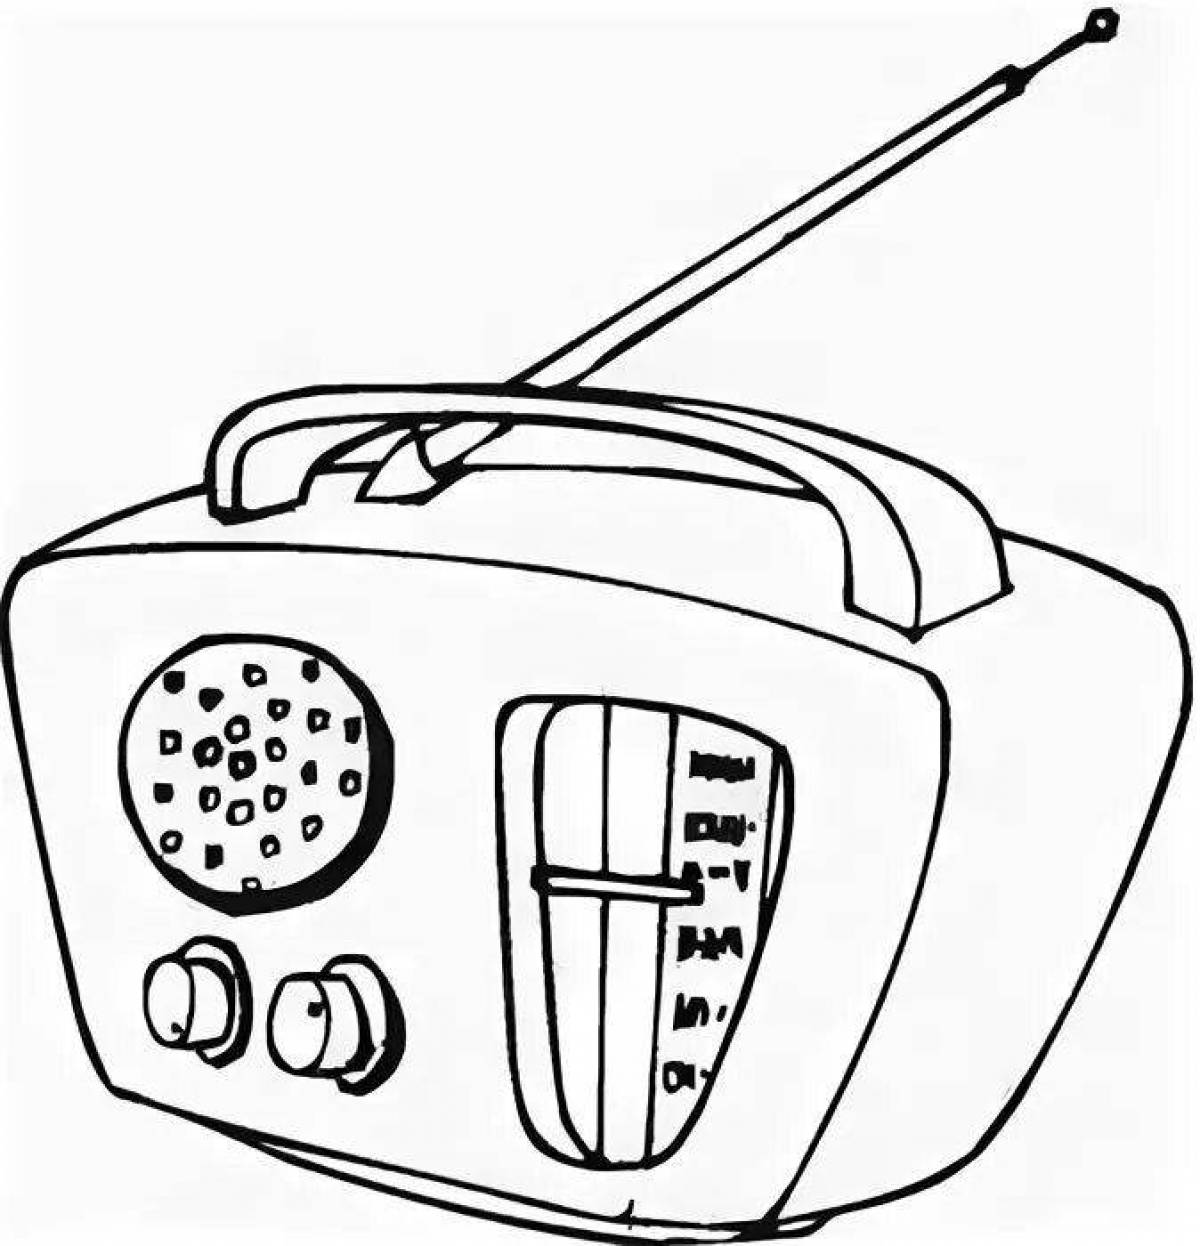 Colorful glowing radio coloring book